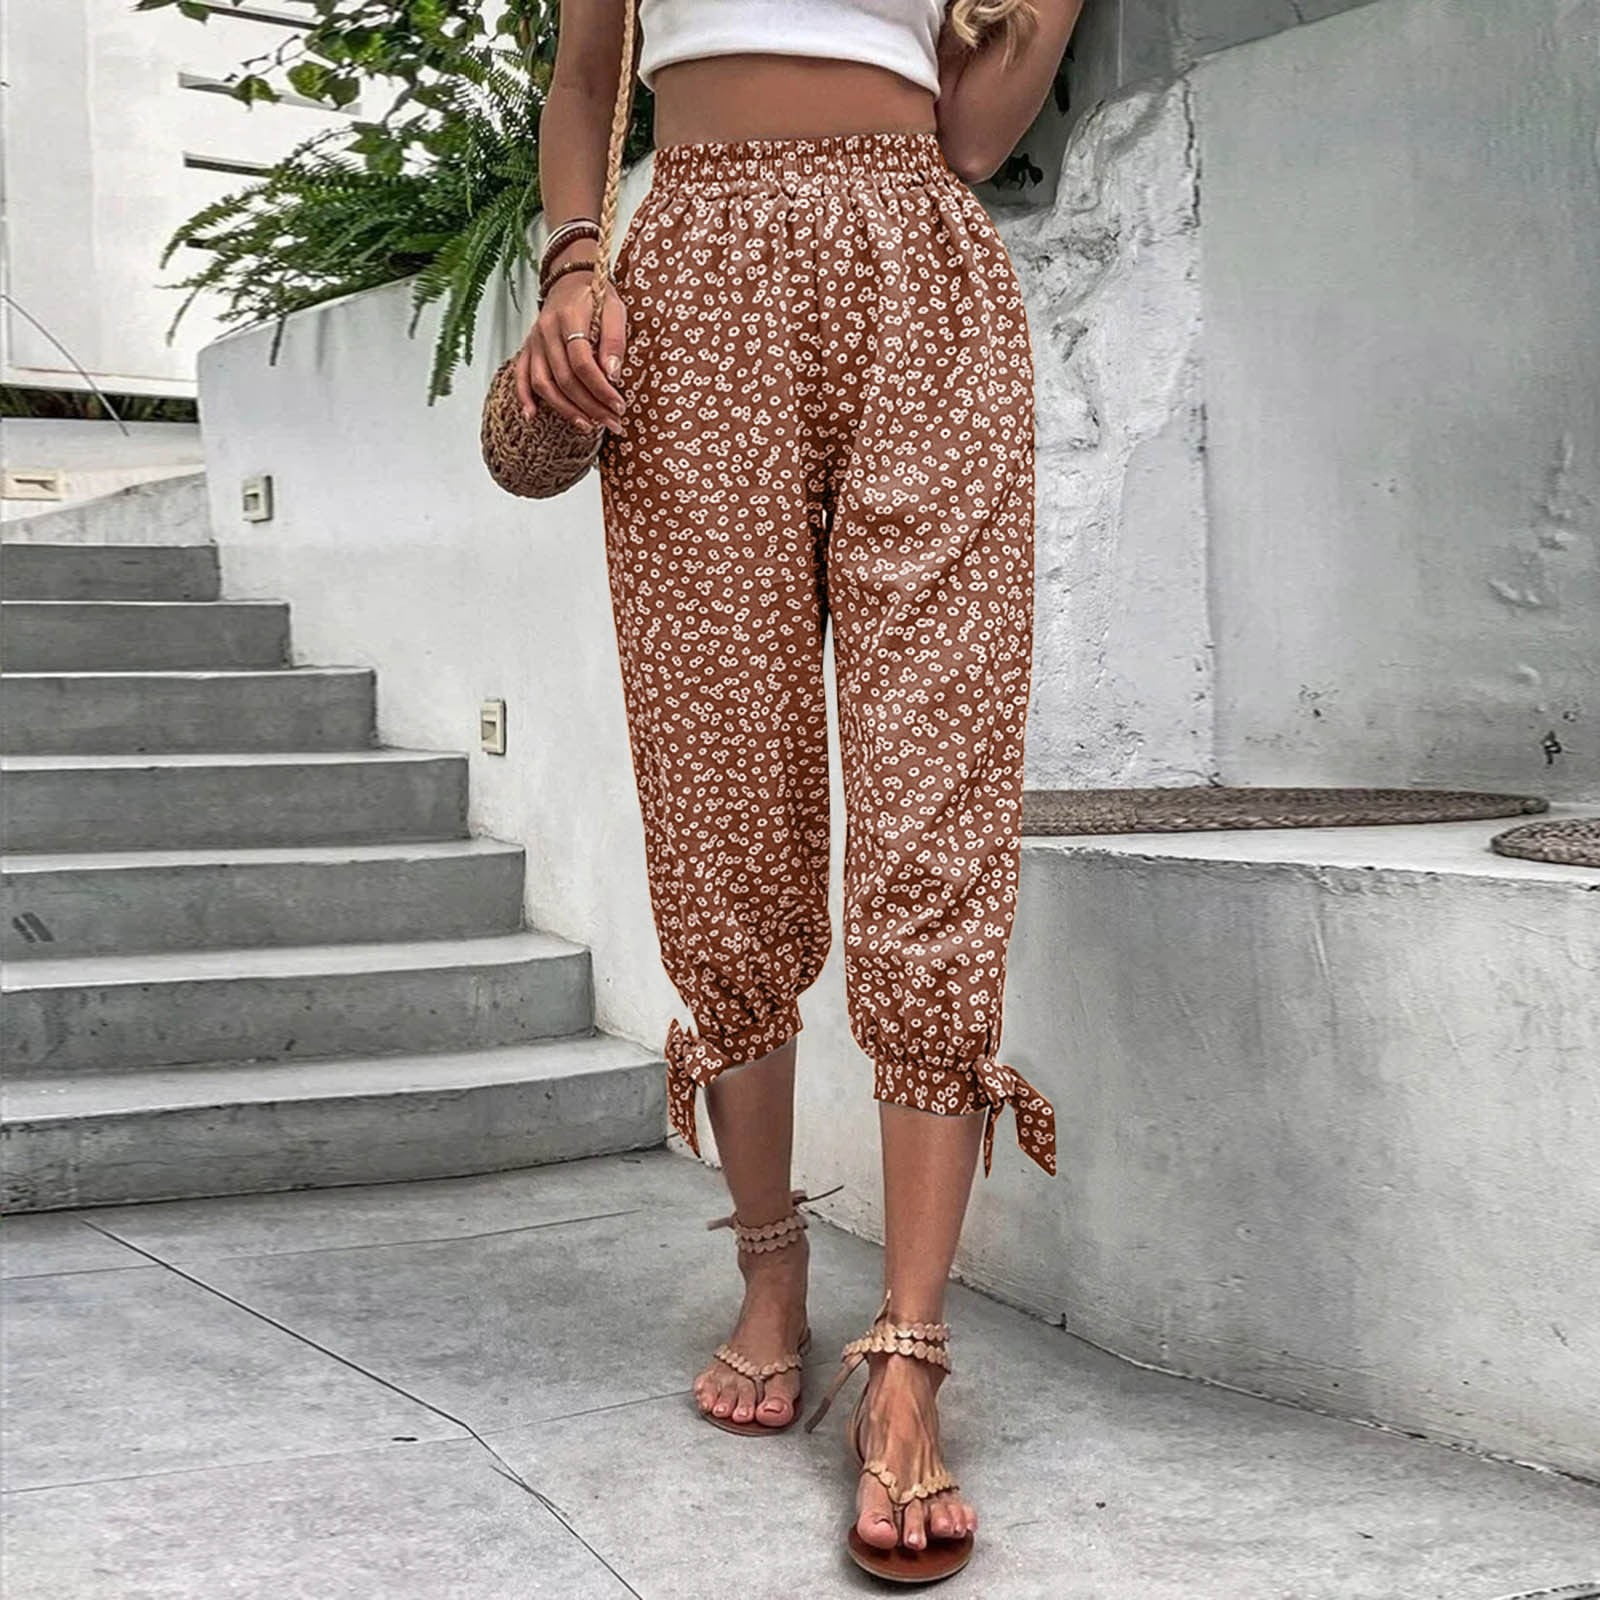 Madame Capris Trousers - Buy Madame Capris Trousers online in India